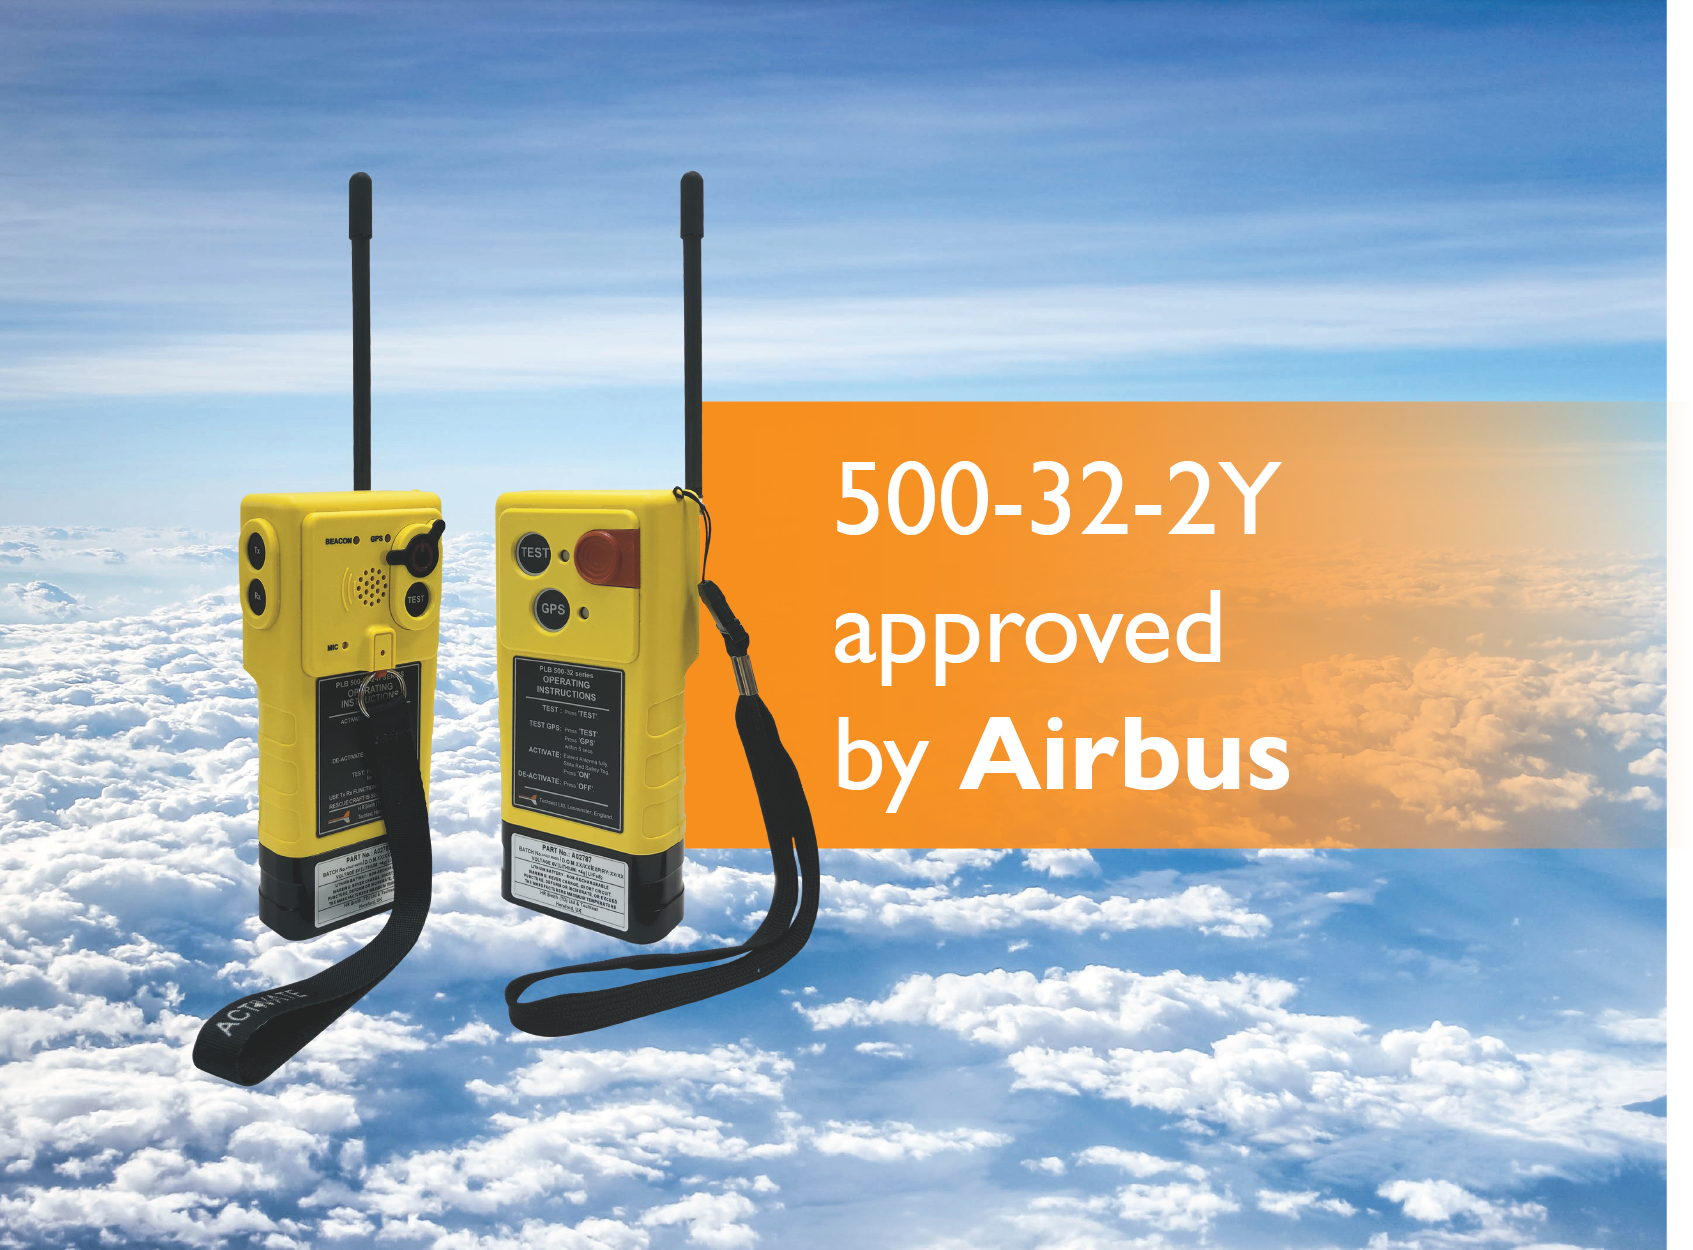 500-32-2Y Survival ELT approved by Airbus